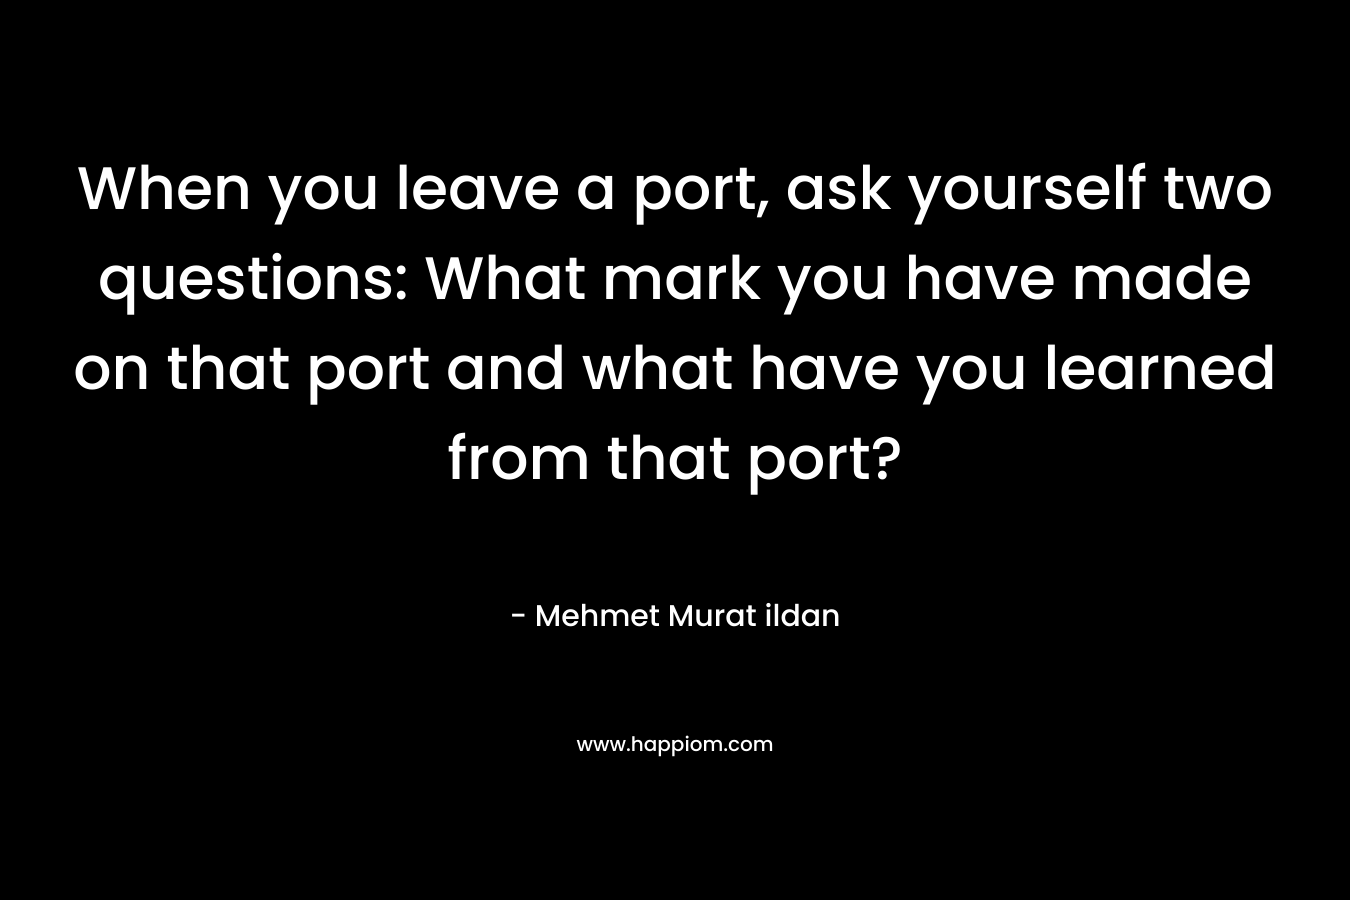 When you leave a port, ask yourself two questions: What mark you have made on that port and what have you learned from that port?